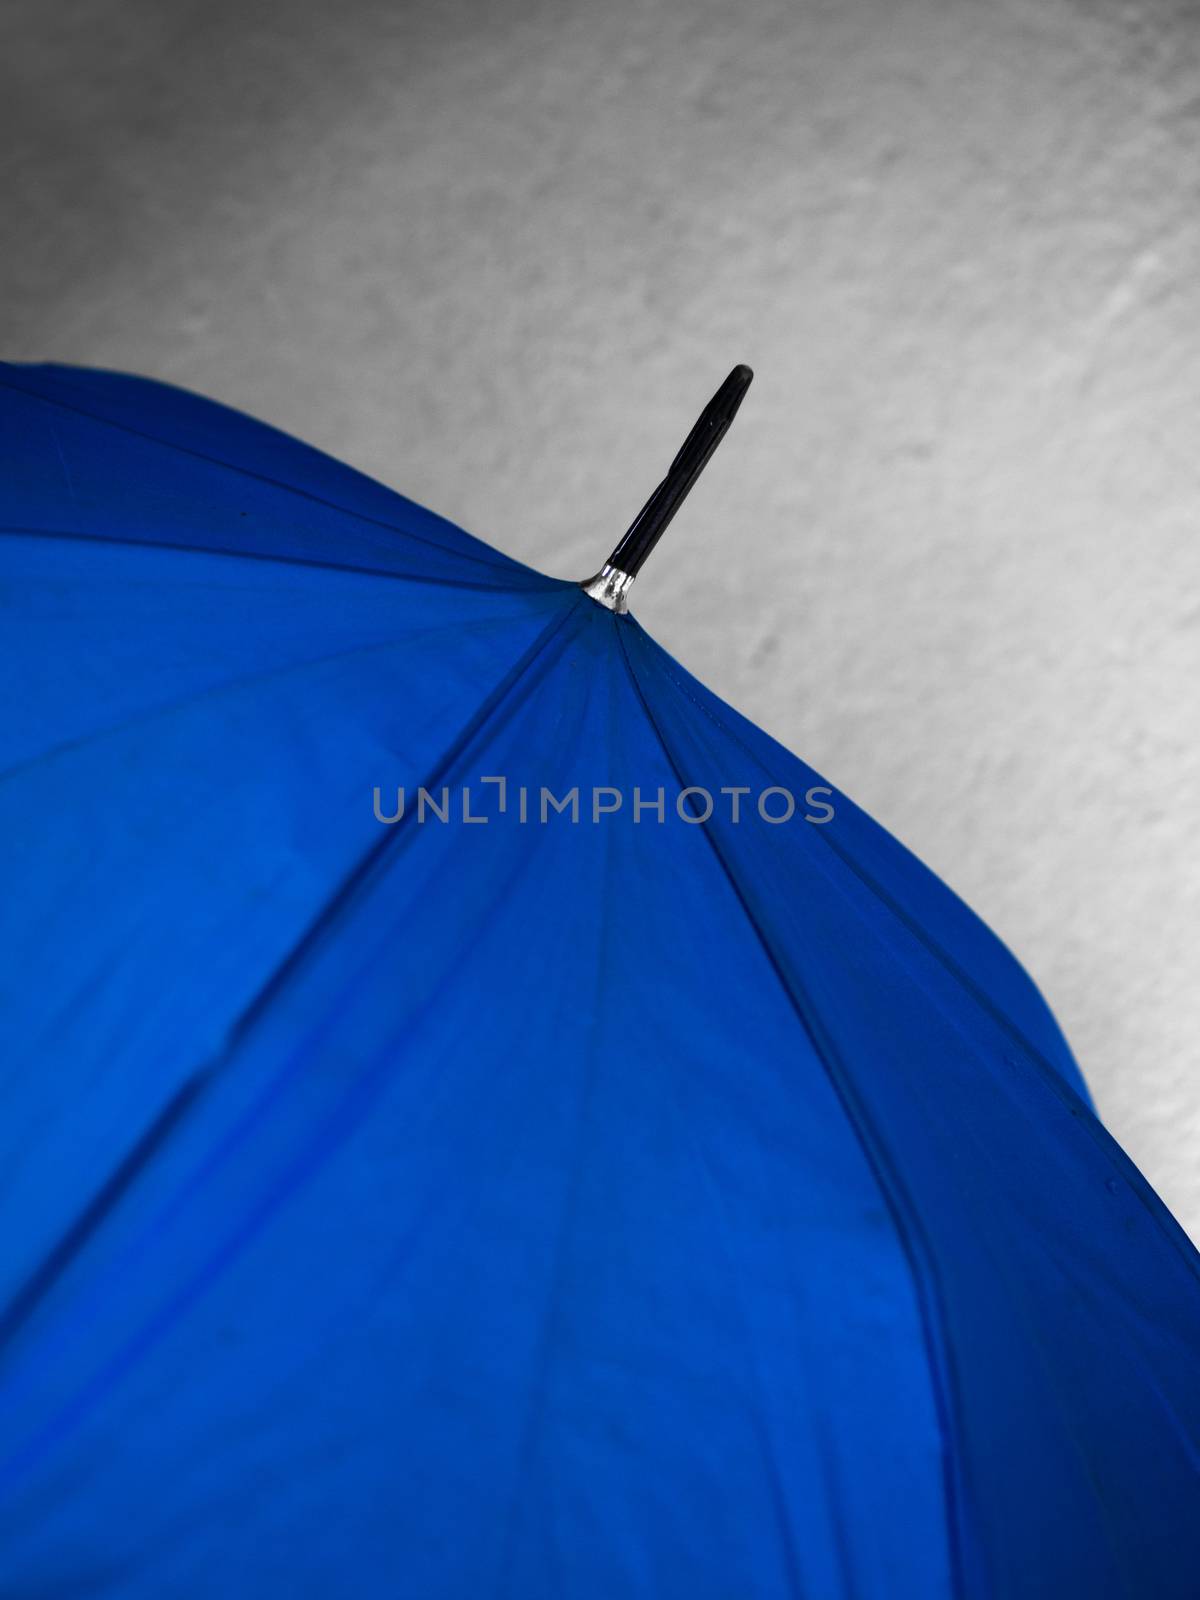 CLOSE-UP OF UMBRELLA by PrettyTG